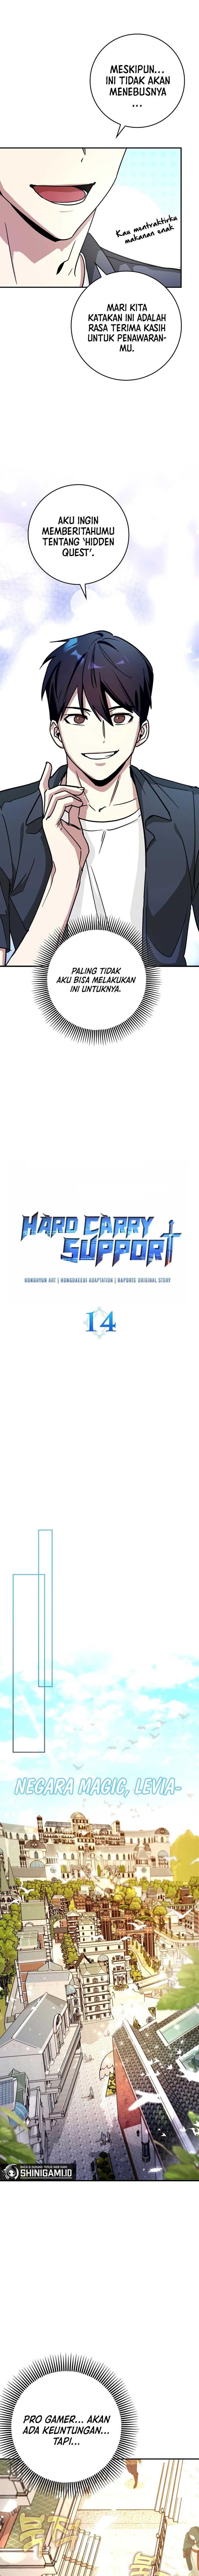 Hard Carry Support Chapter 14